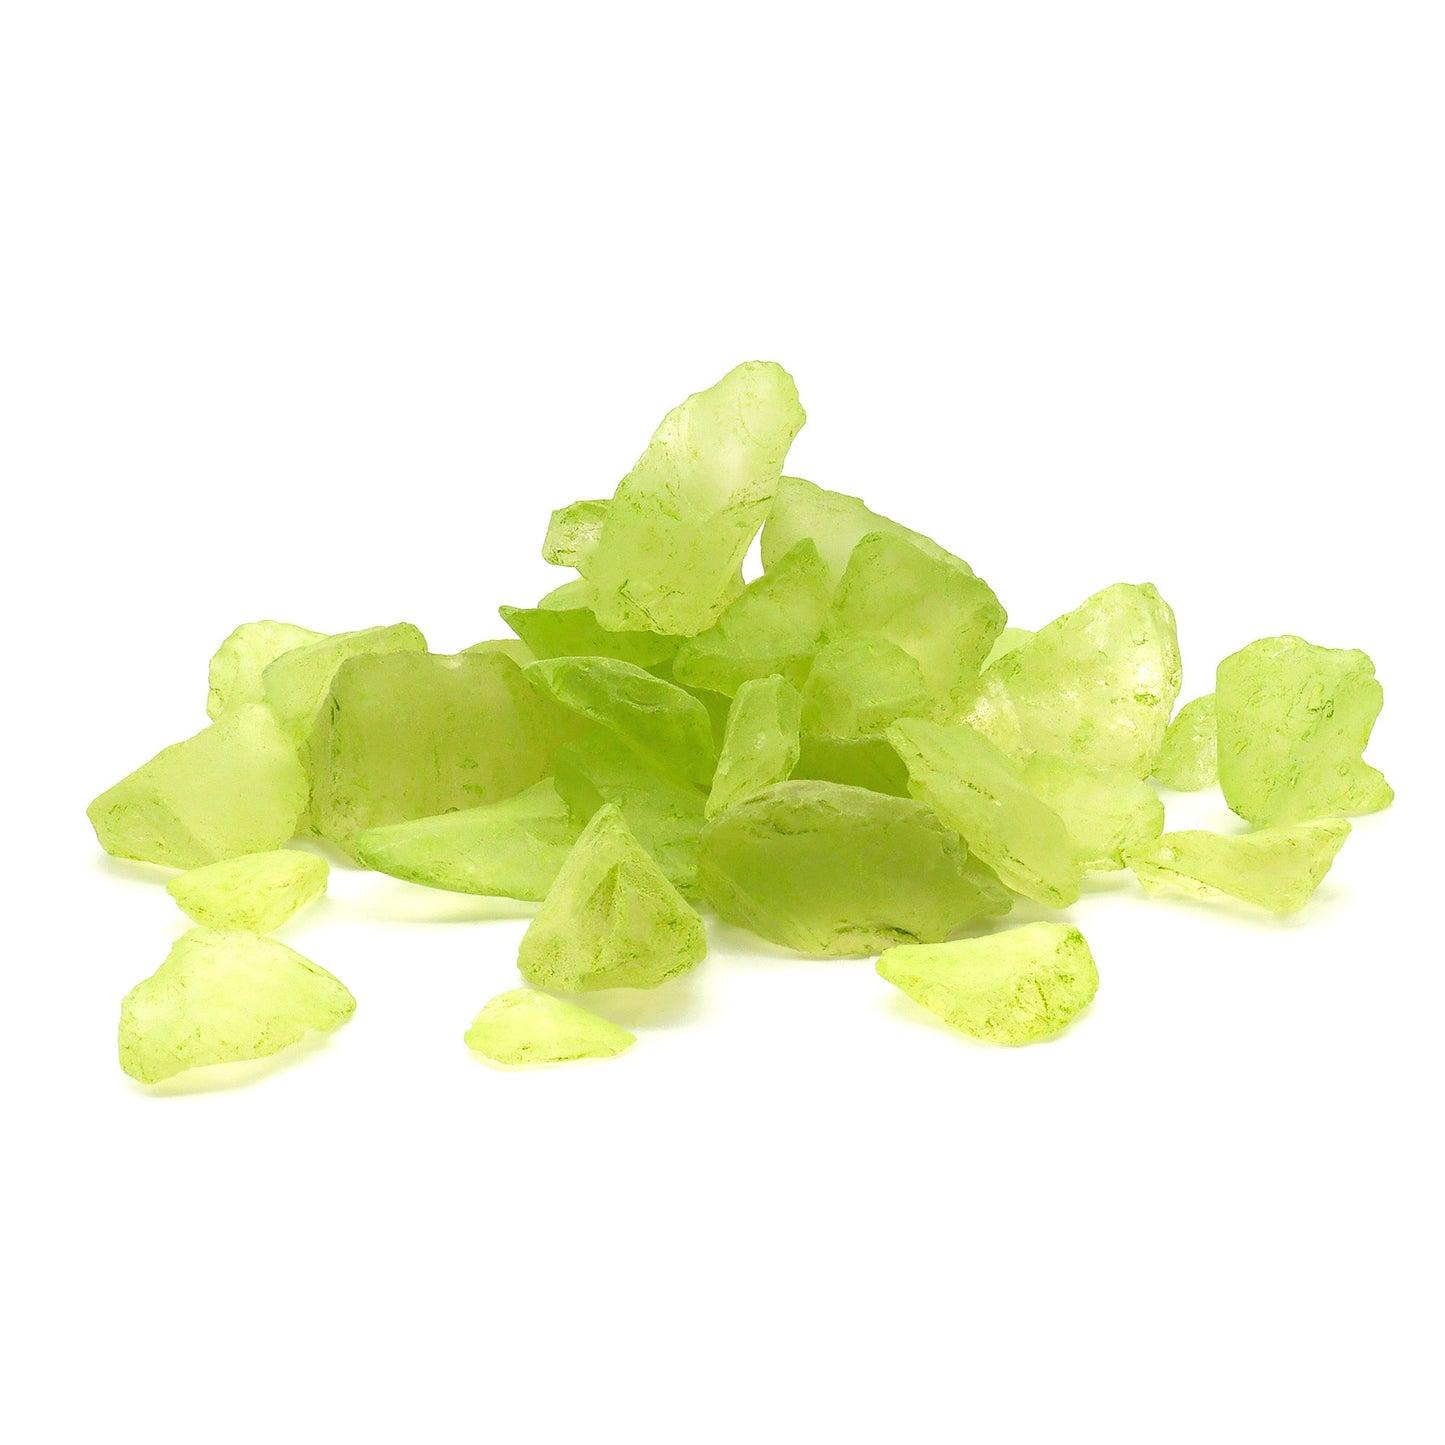 Chartreuse Frosted Sea Glass Pebbles - 4 lb